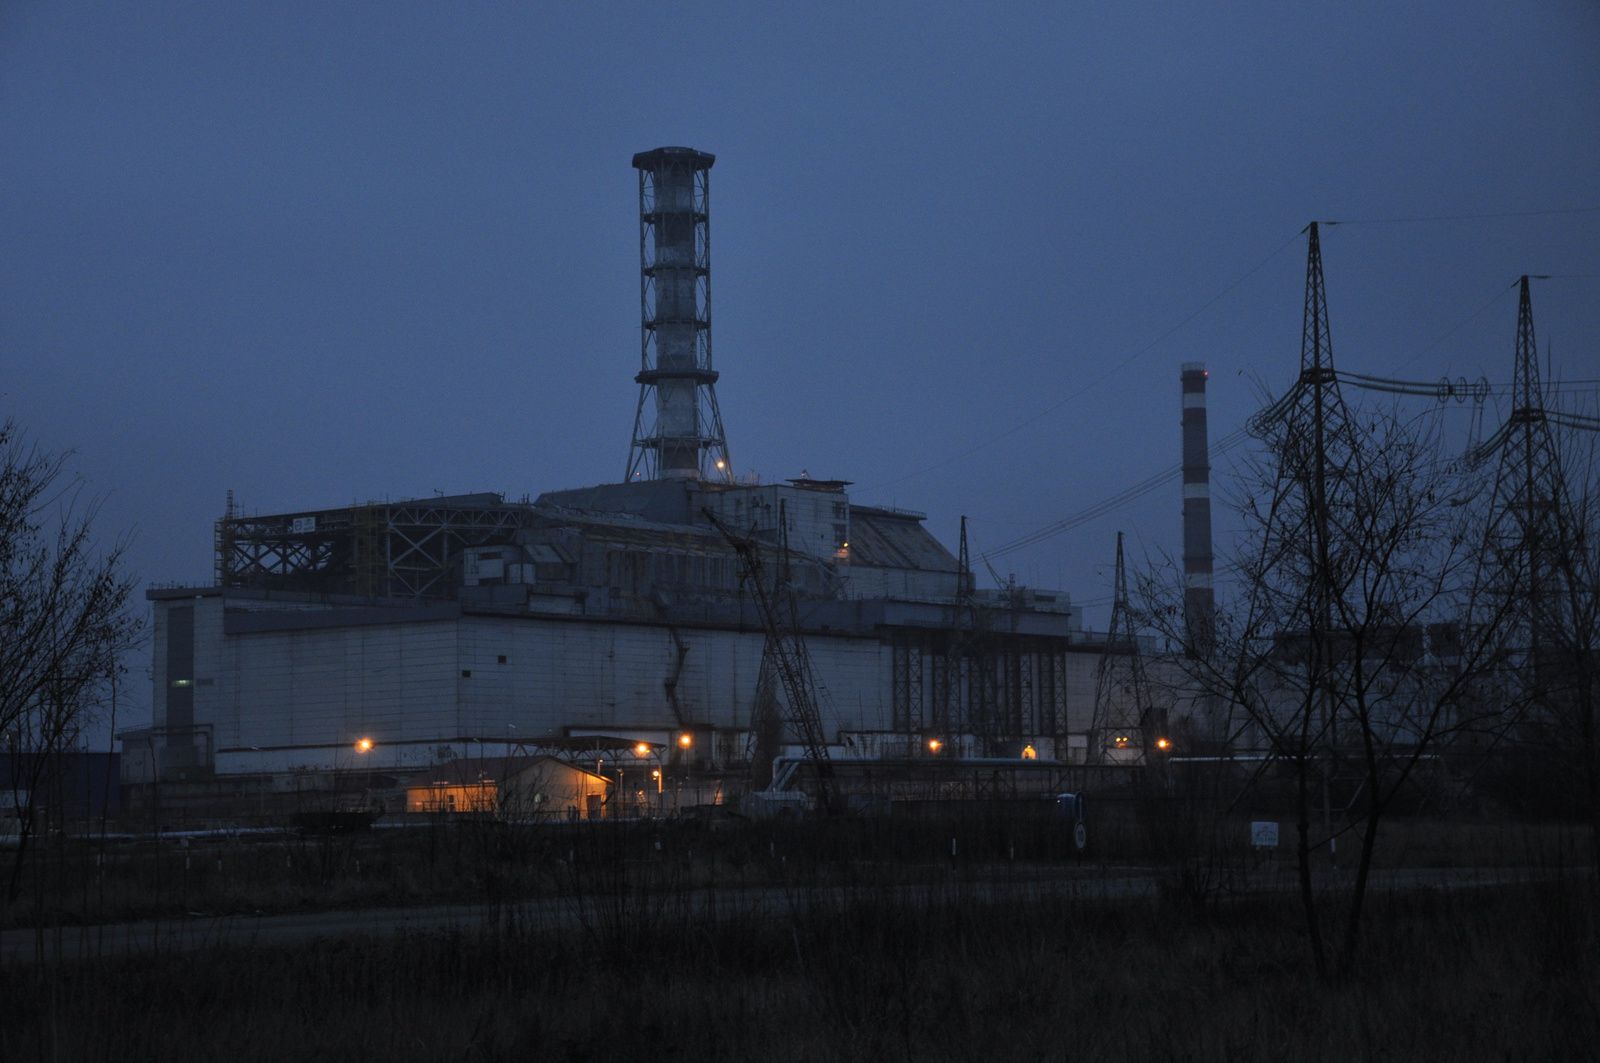 Chernobyl Nuclear Power Plant's reactor 4